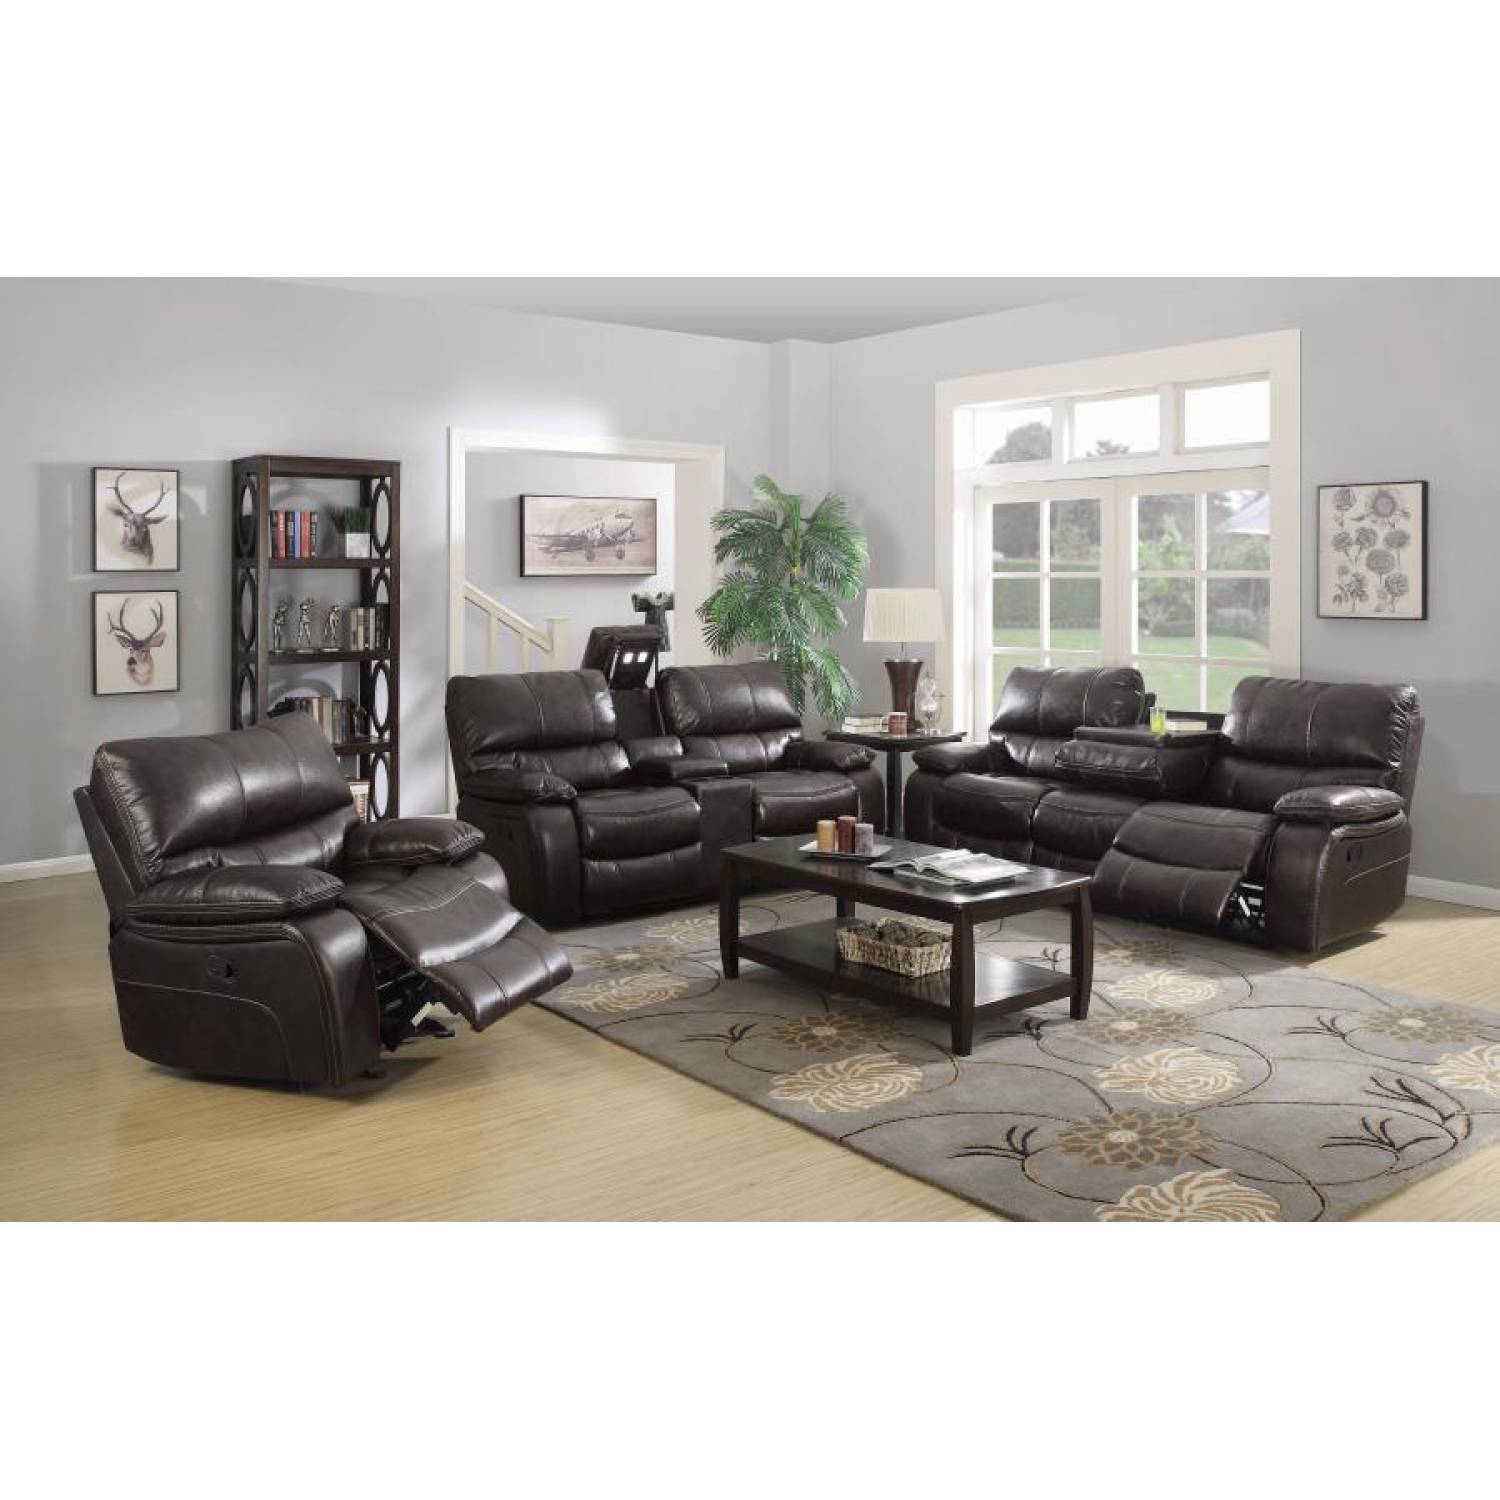 Willemse 3 Piece Reclining Living Room Set 3PC SOFA LOVE RECLINER 601931 S3